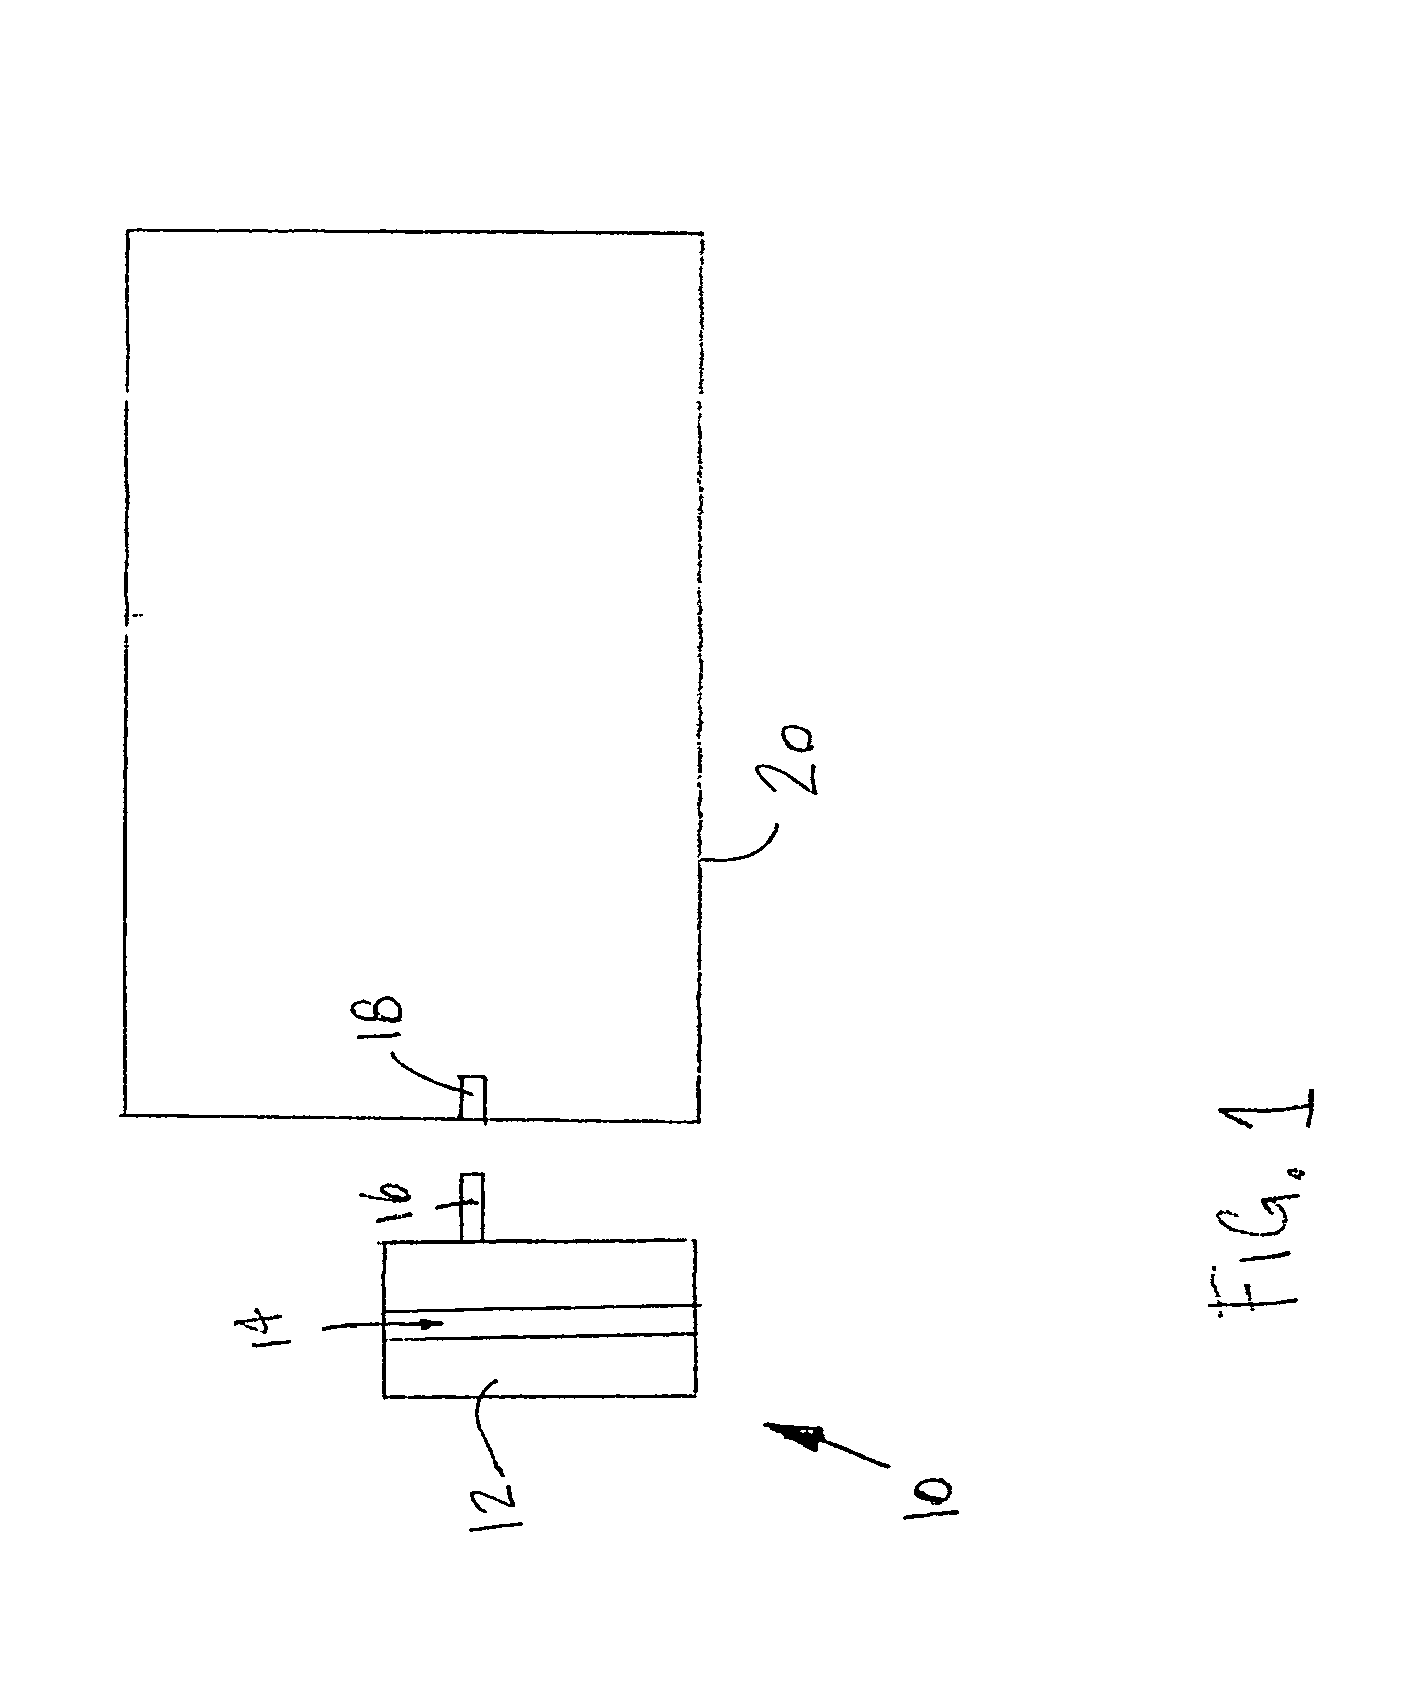 Card reader device and method of use